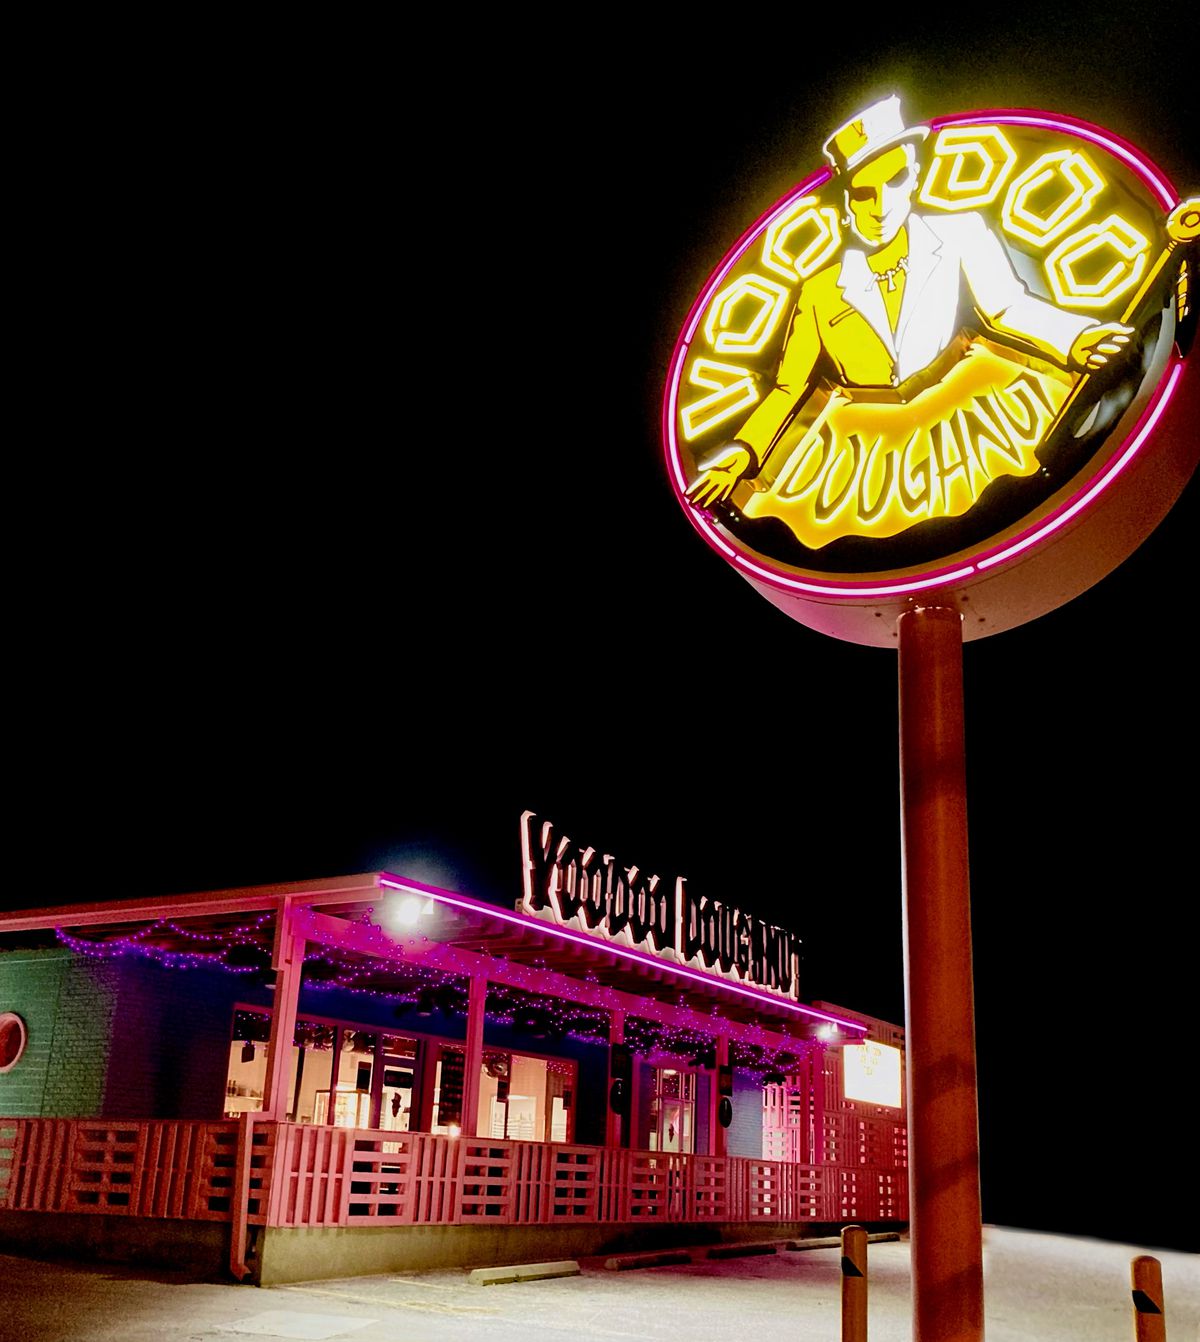 A restaurant with the sign Voodoo Dougnuts.